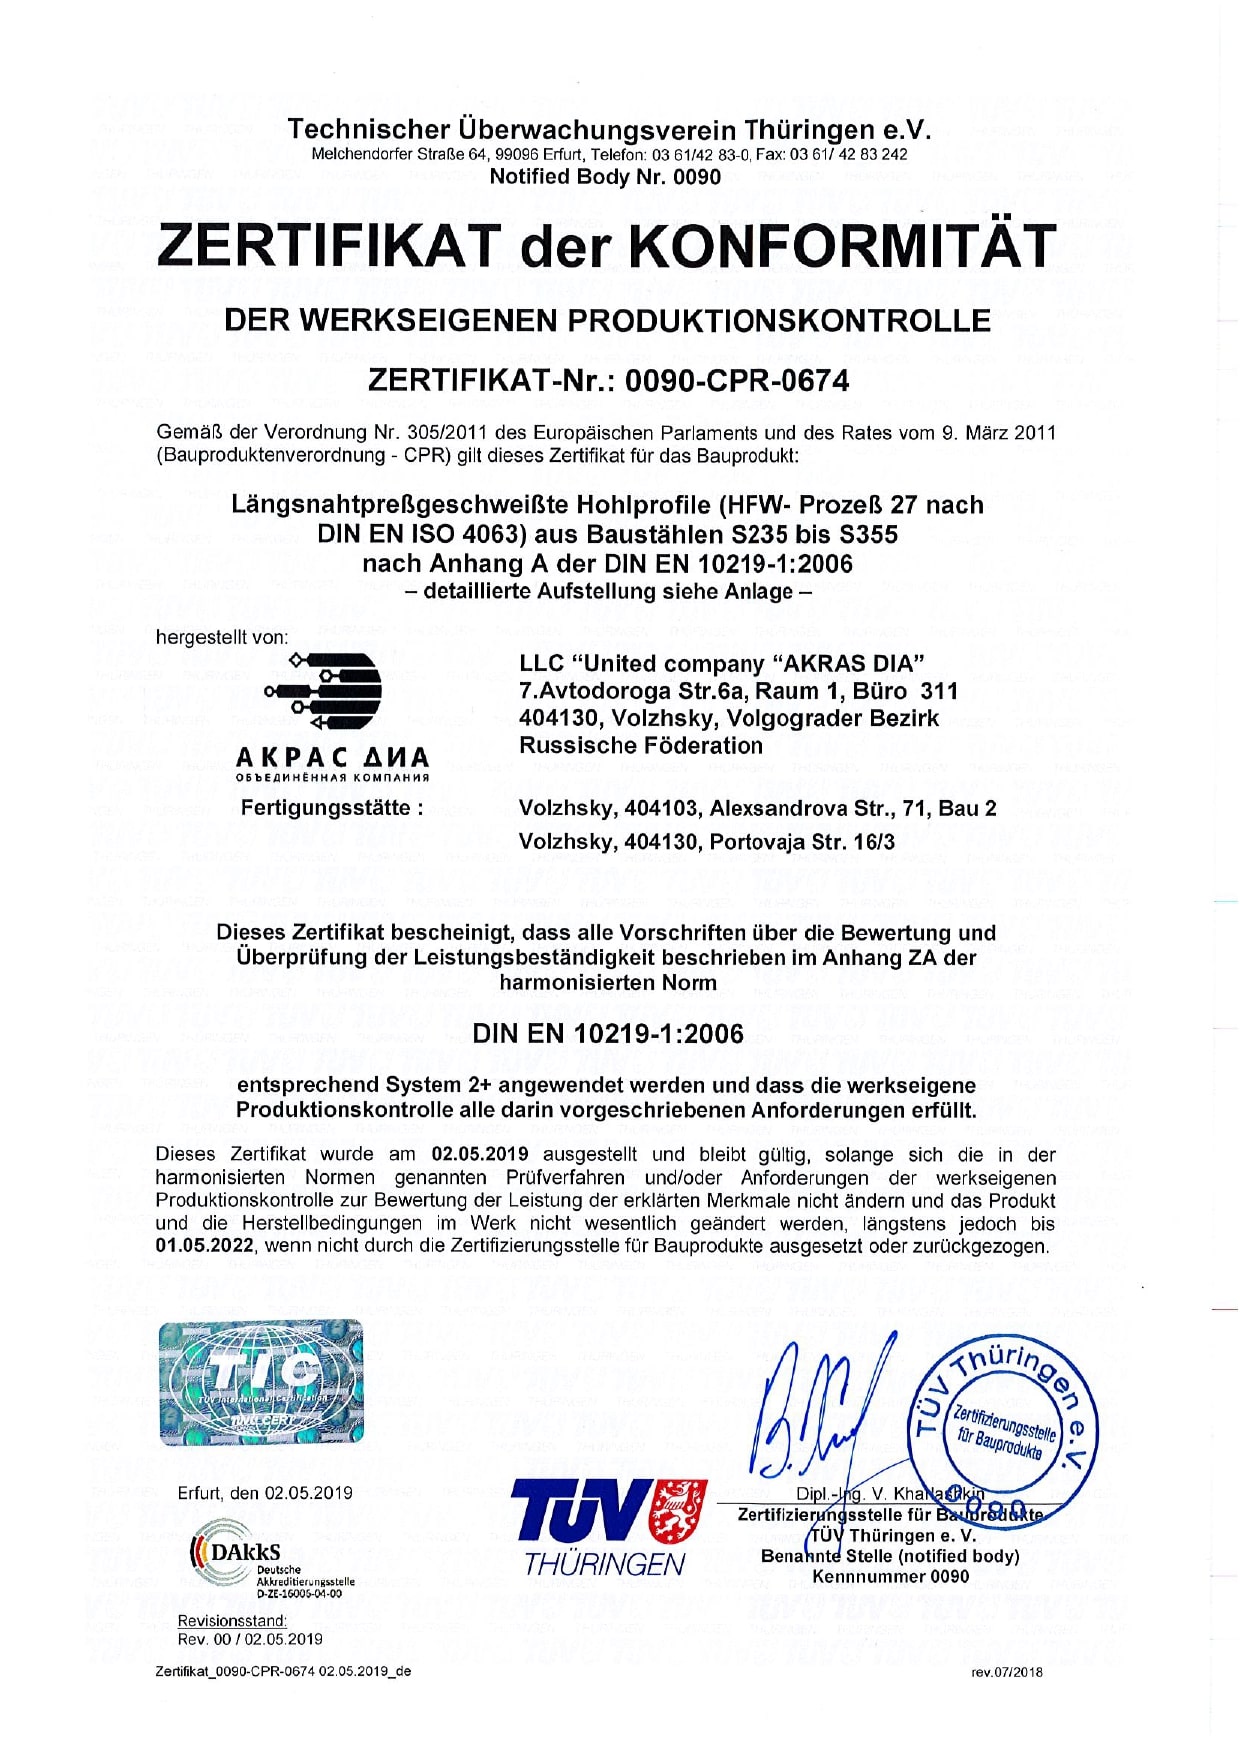 Certificate of Compliance of Internal Production Control No. 0090-CPR-0674 (de)